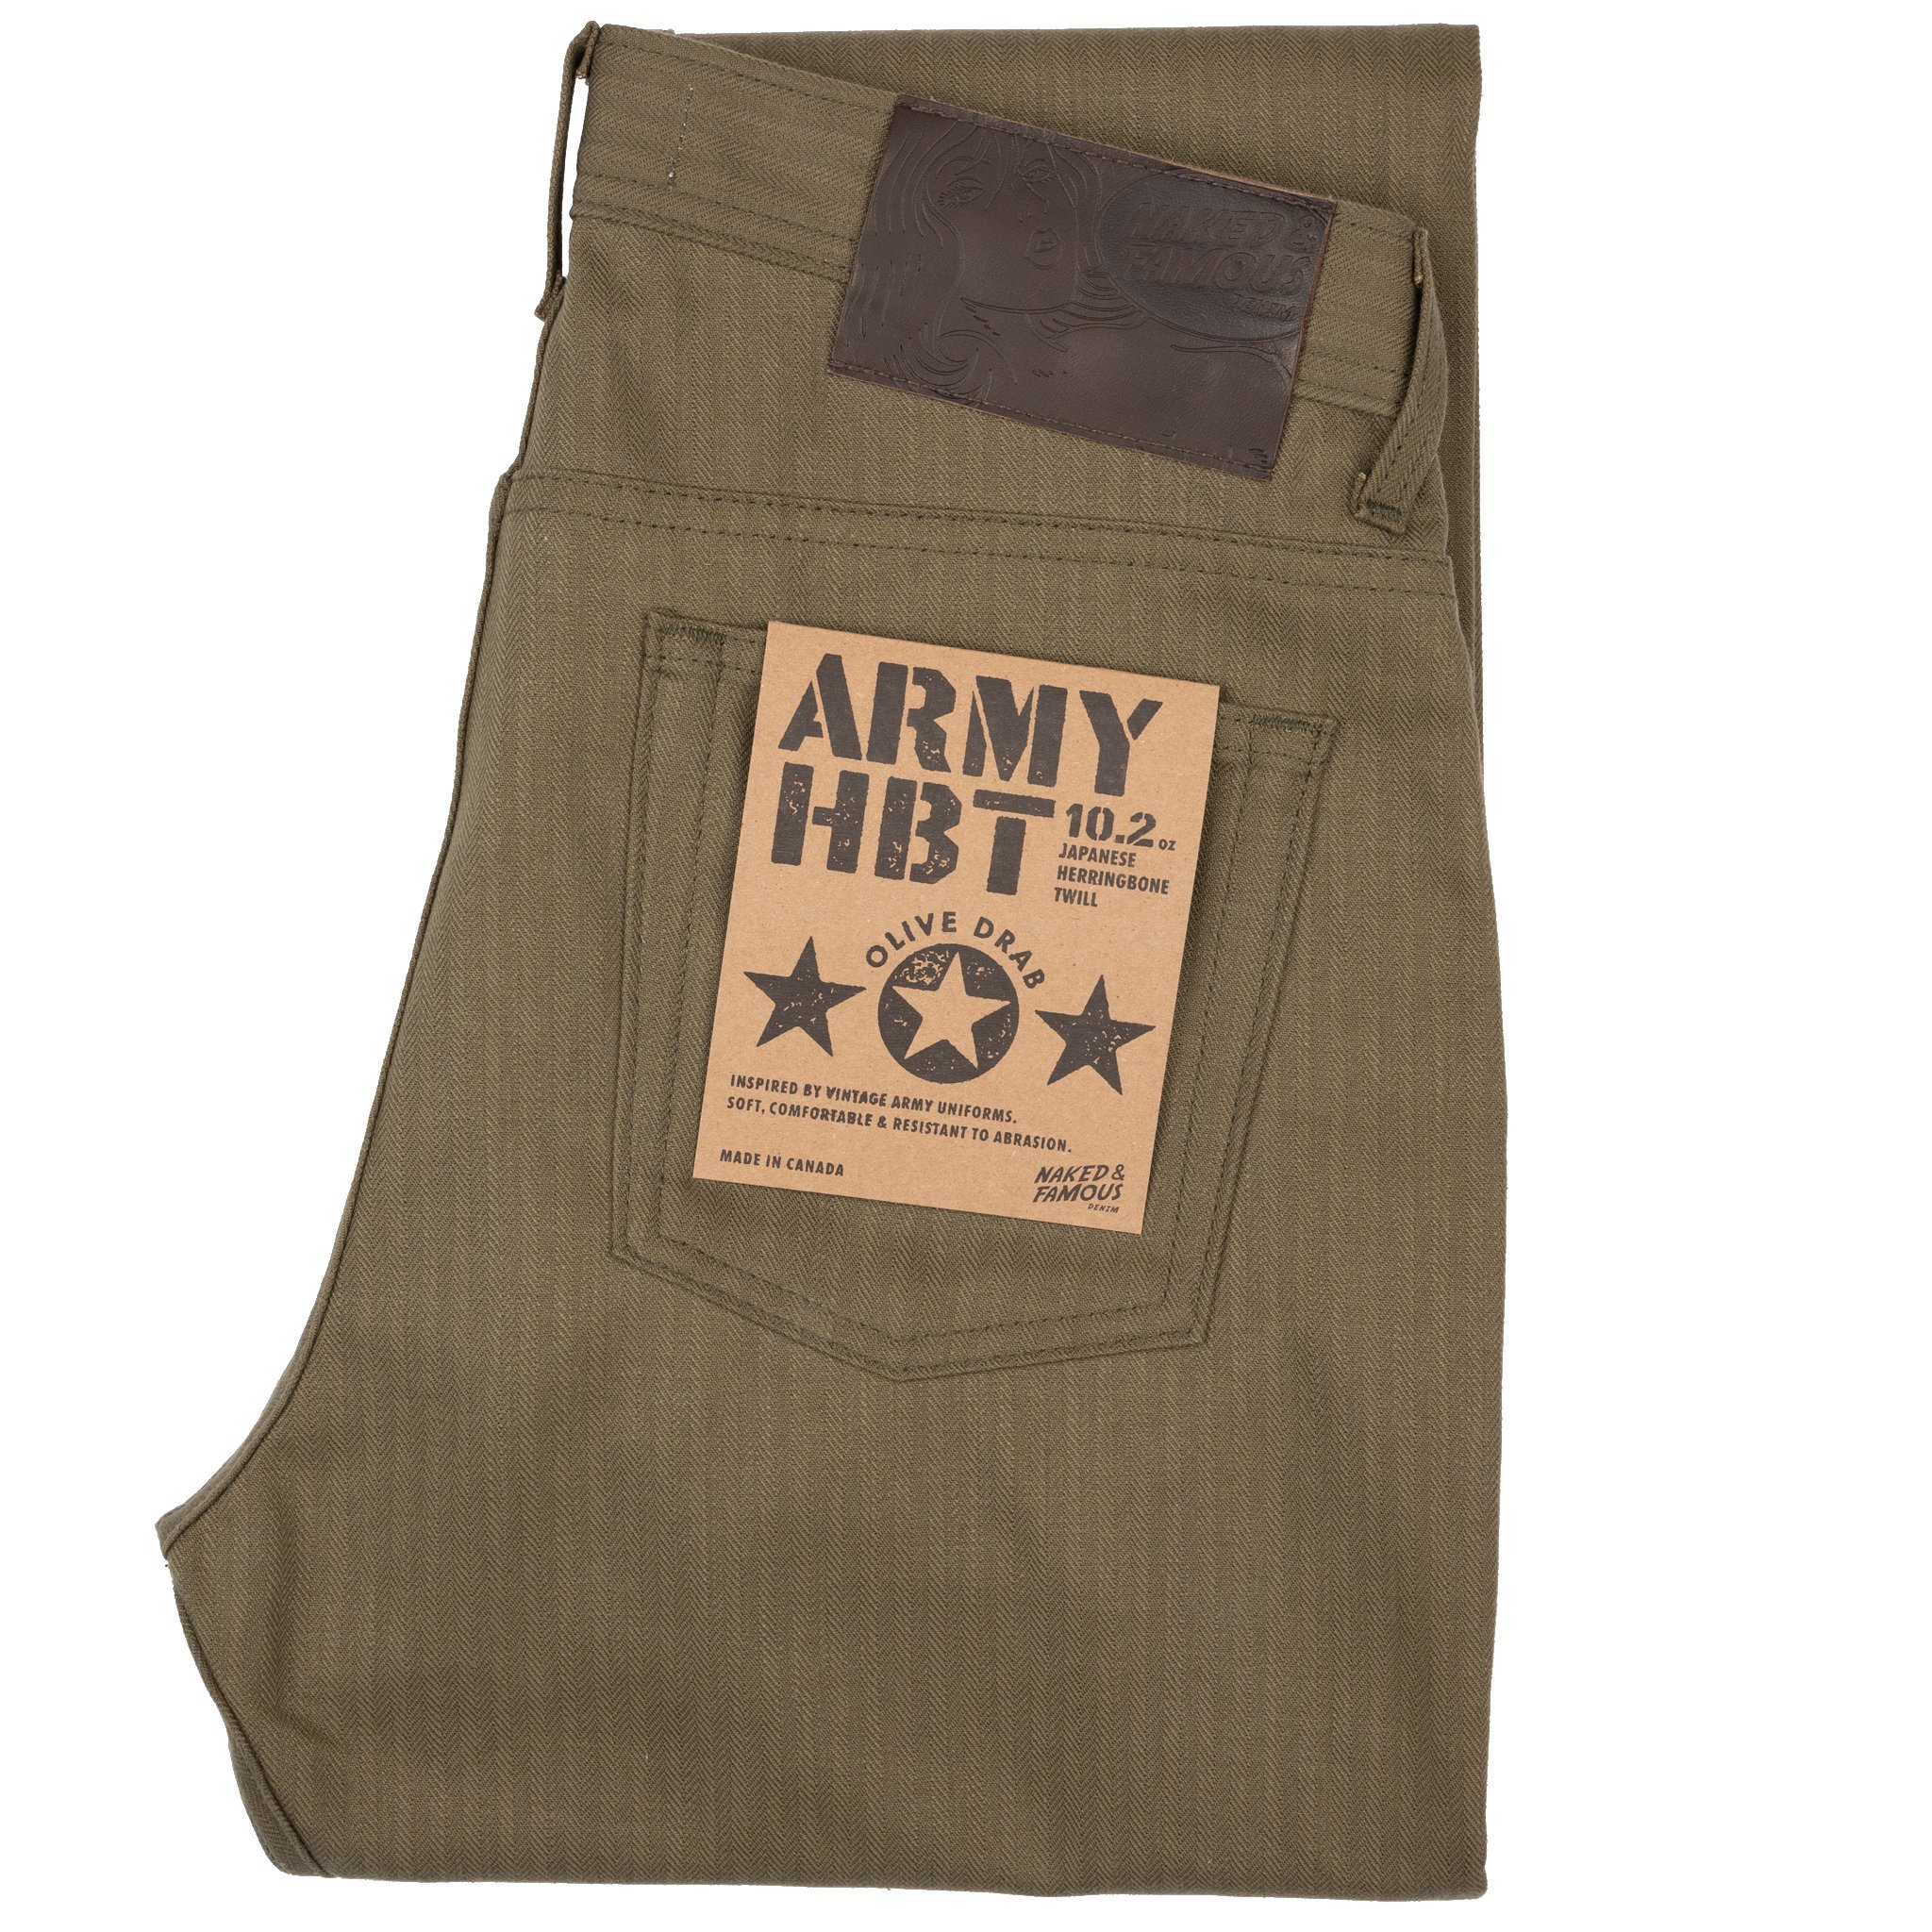  Army HBT - Olive Drab - Jeans 